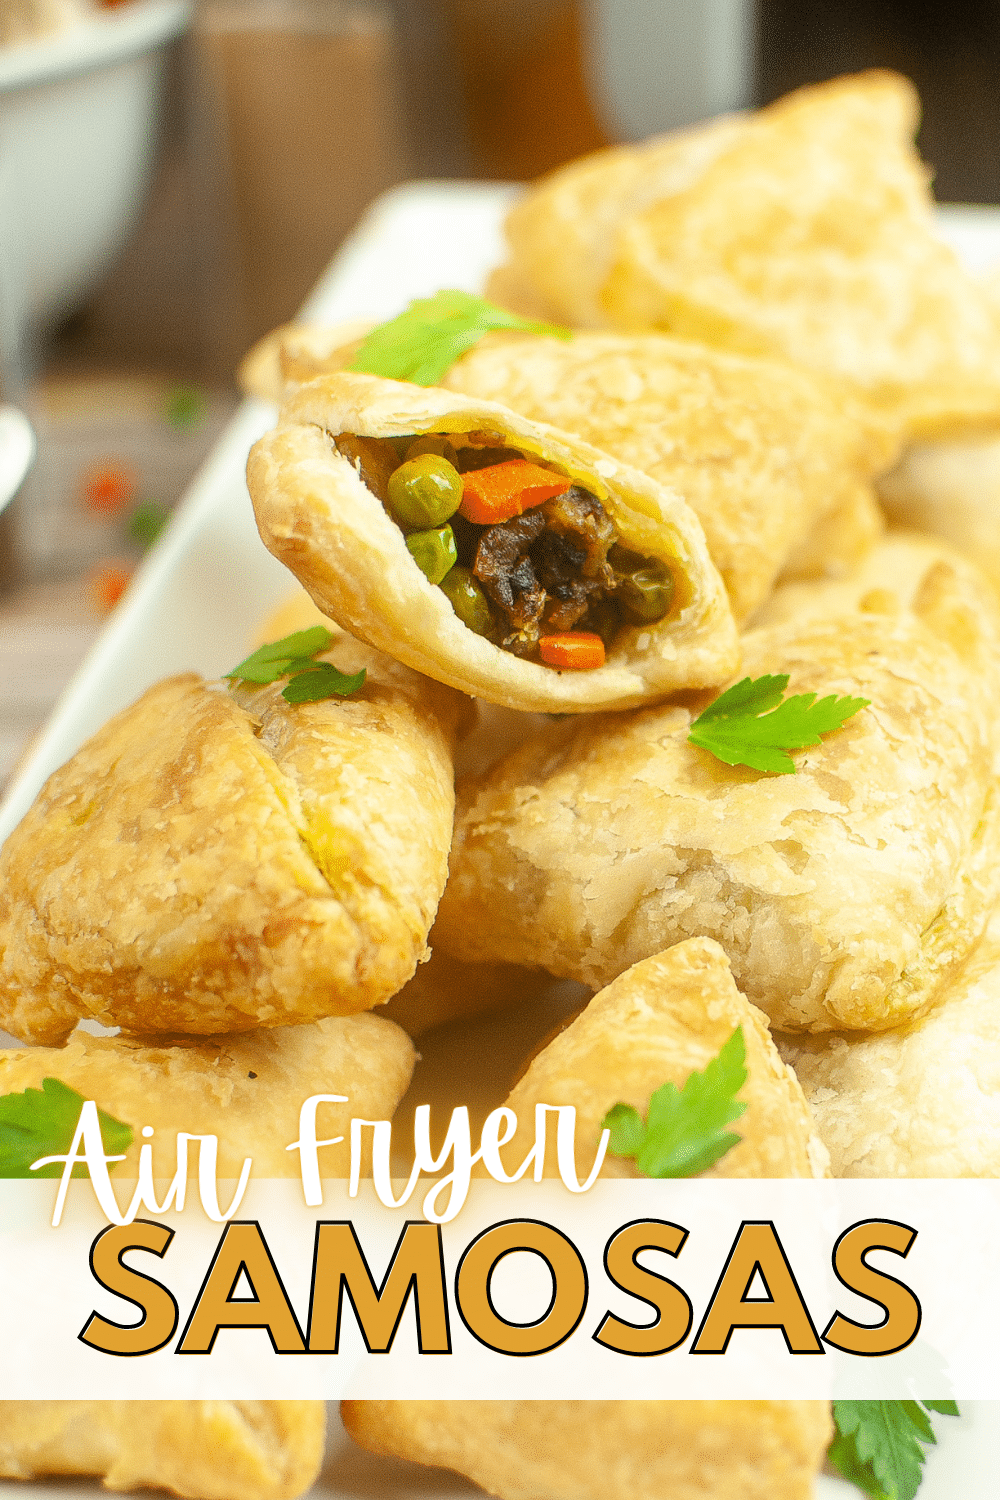 These Air Fryer Samosas are crispy, flavorful, and so easy to make! Serve them with a sweet chutney for a tasty snack or meal. #airfryersamosas #airfryer #samosas #airfryersamosa #chutney via @wondermomwannab